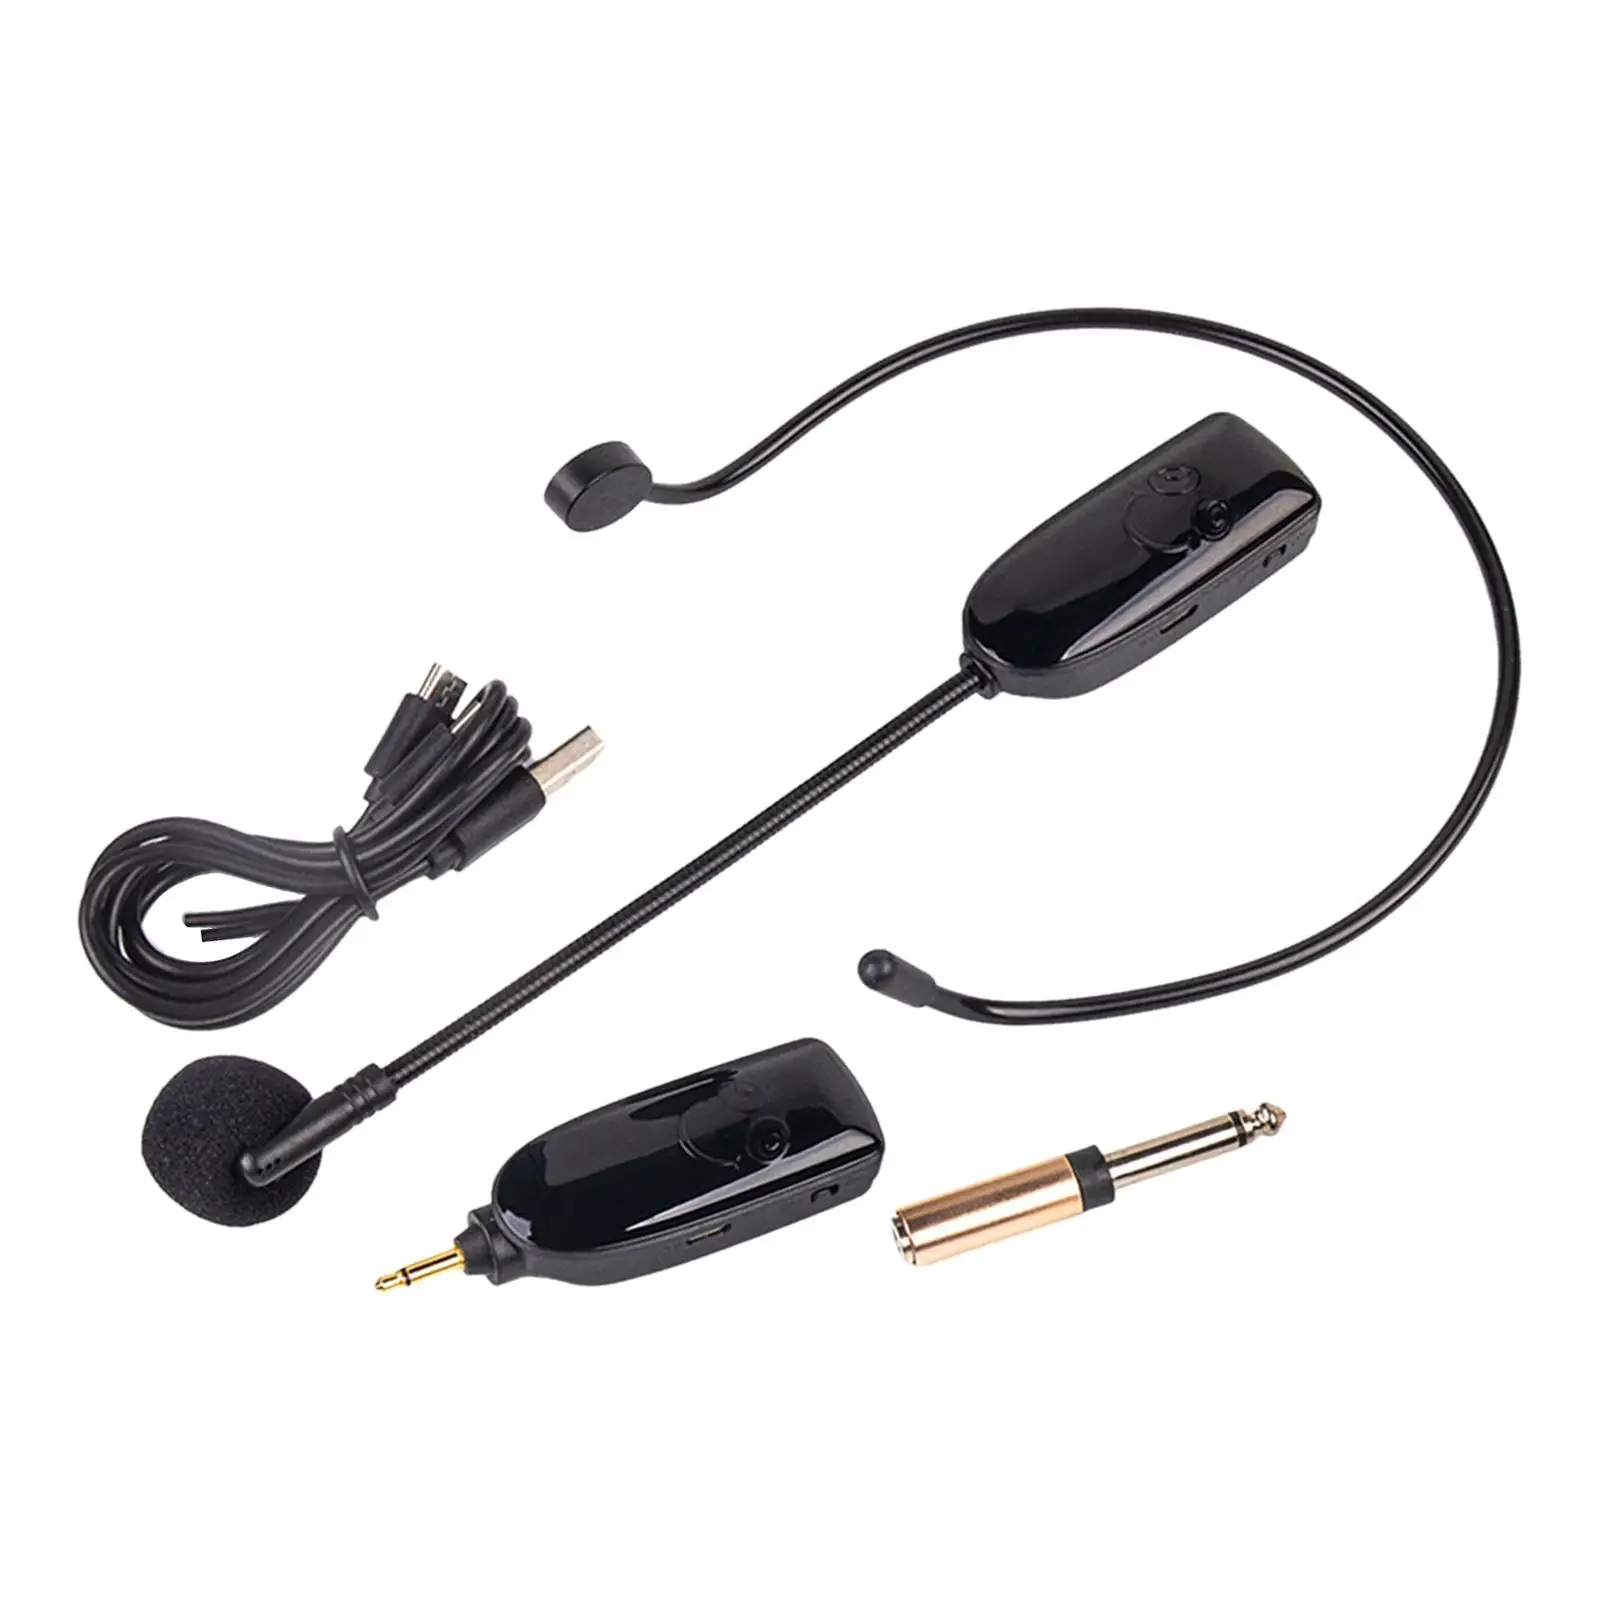 Headset Microphone 20M Range Headset Mic for Teacher Teaching Voice Amplifier Stage Speakers